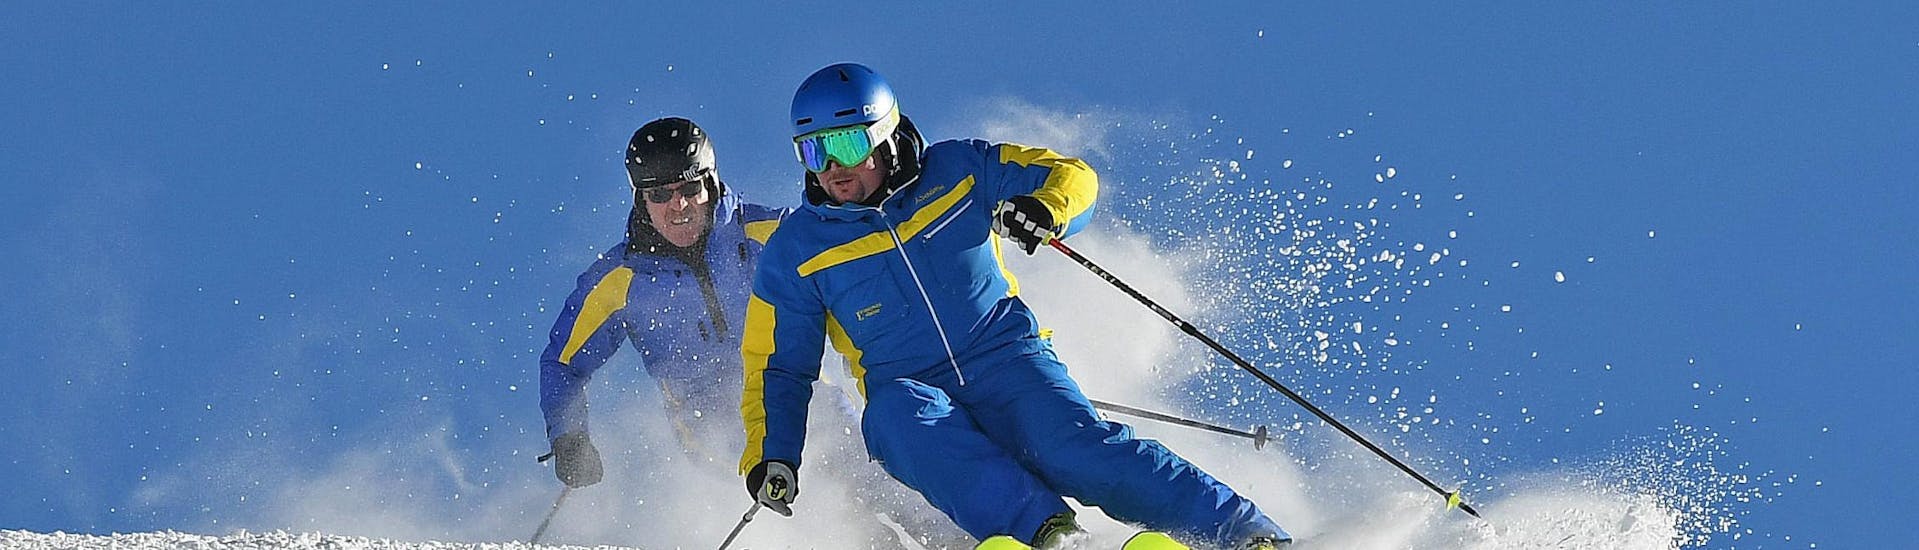 Adult Ski Lessons for Advanced Skiers.